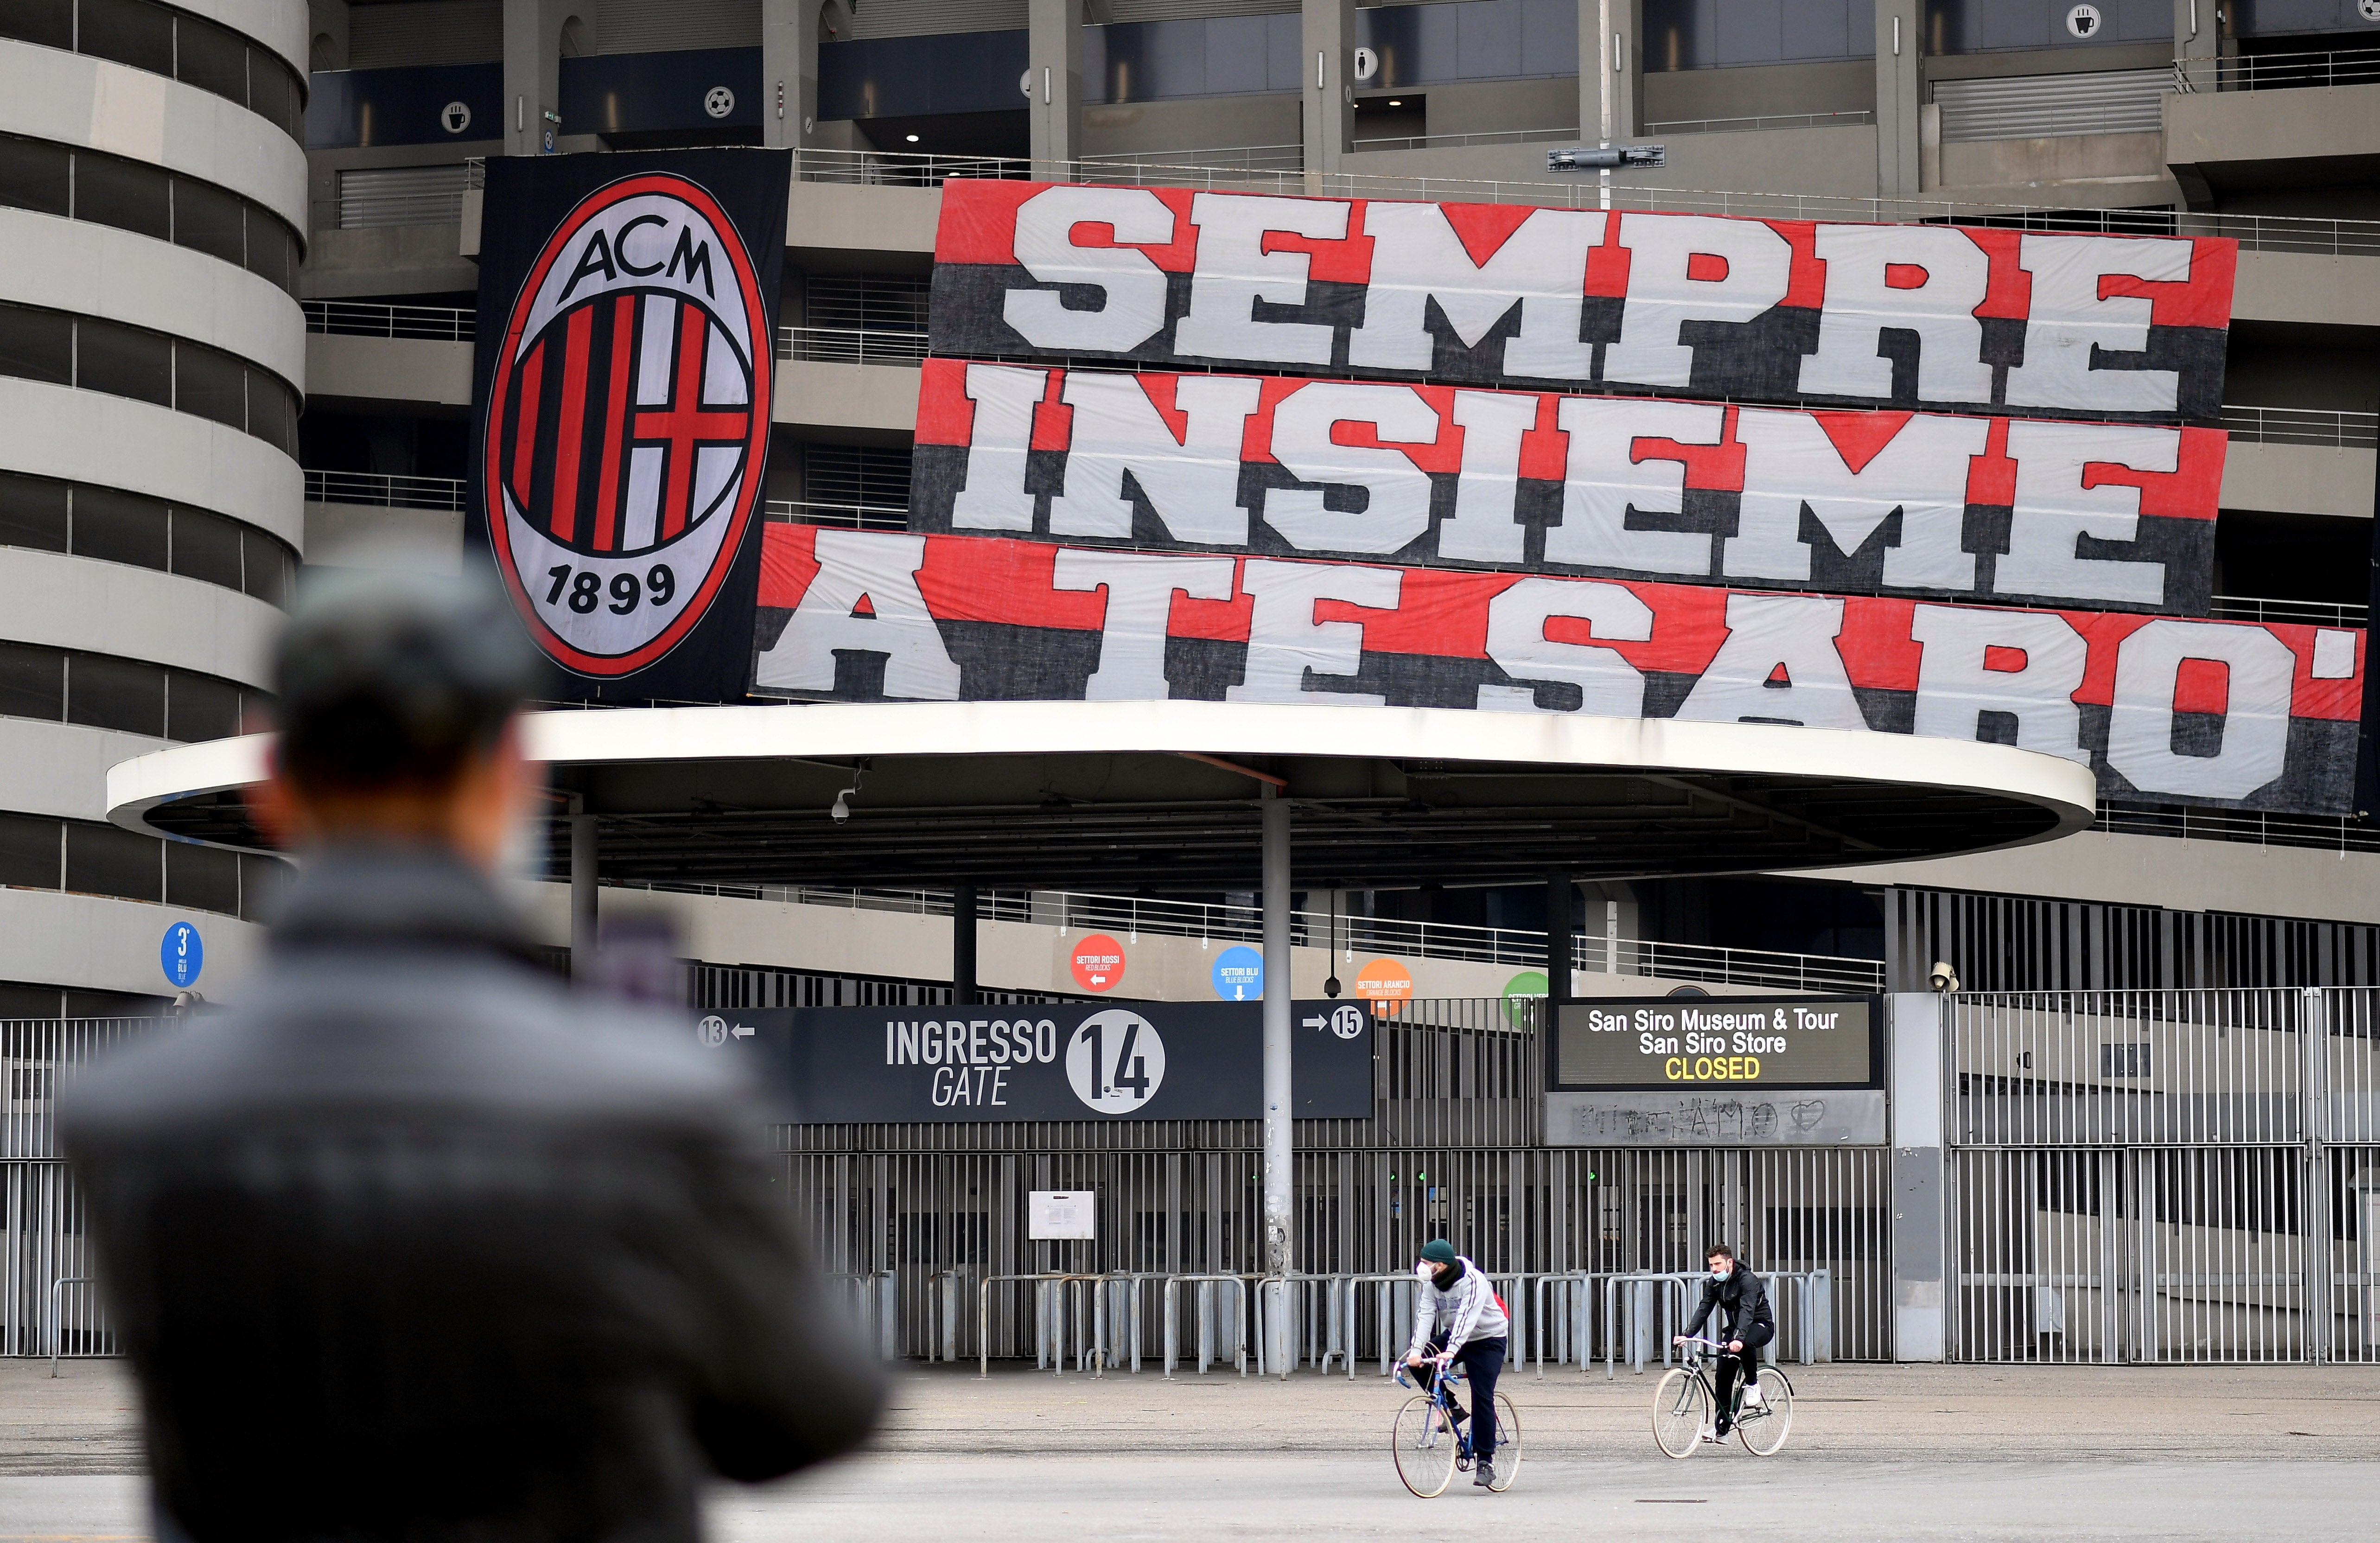 AC Milan are rejuvenated under new ownership